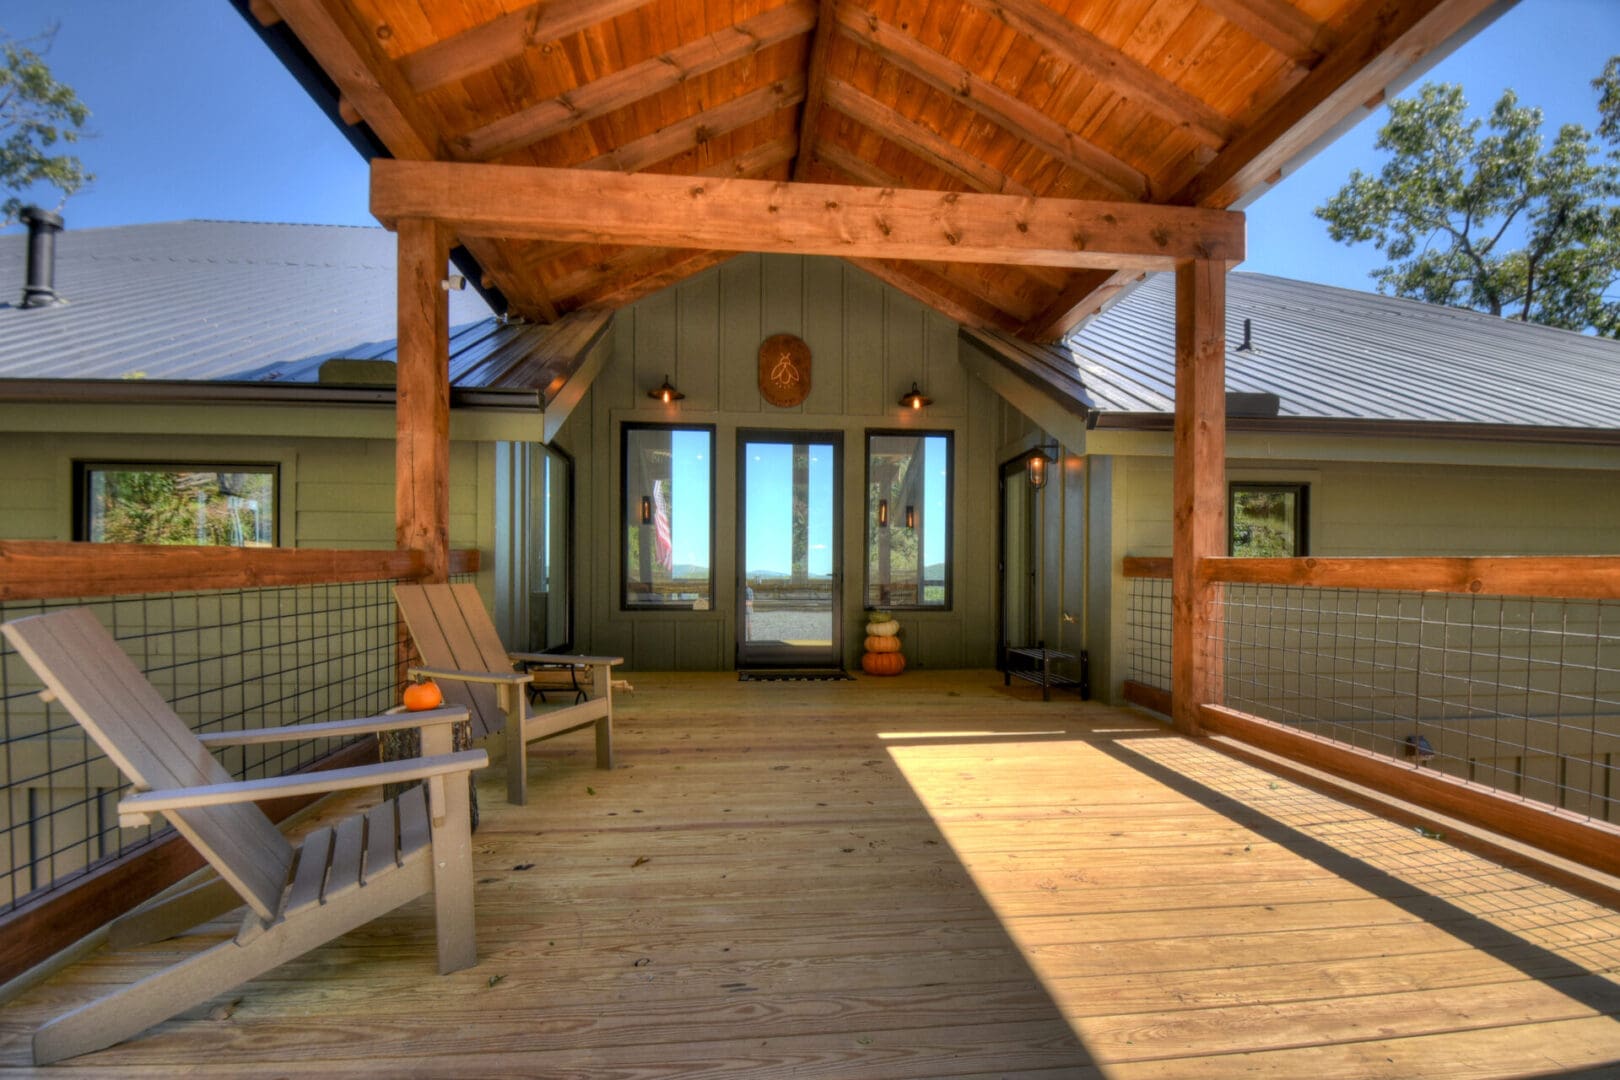 Architectural Design services for a porch of a cabin with a wooden deck.